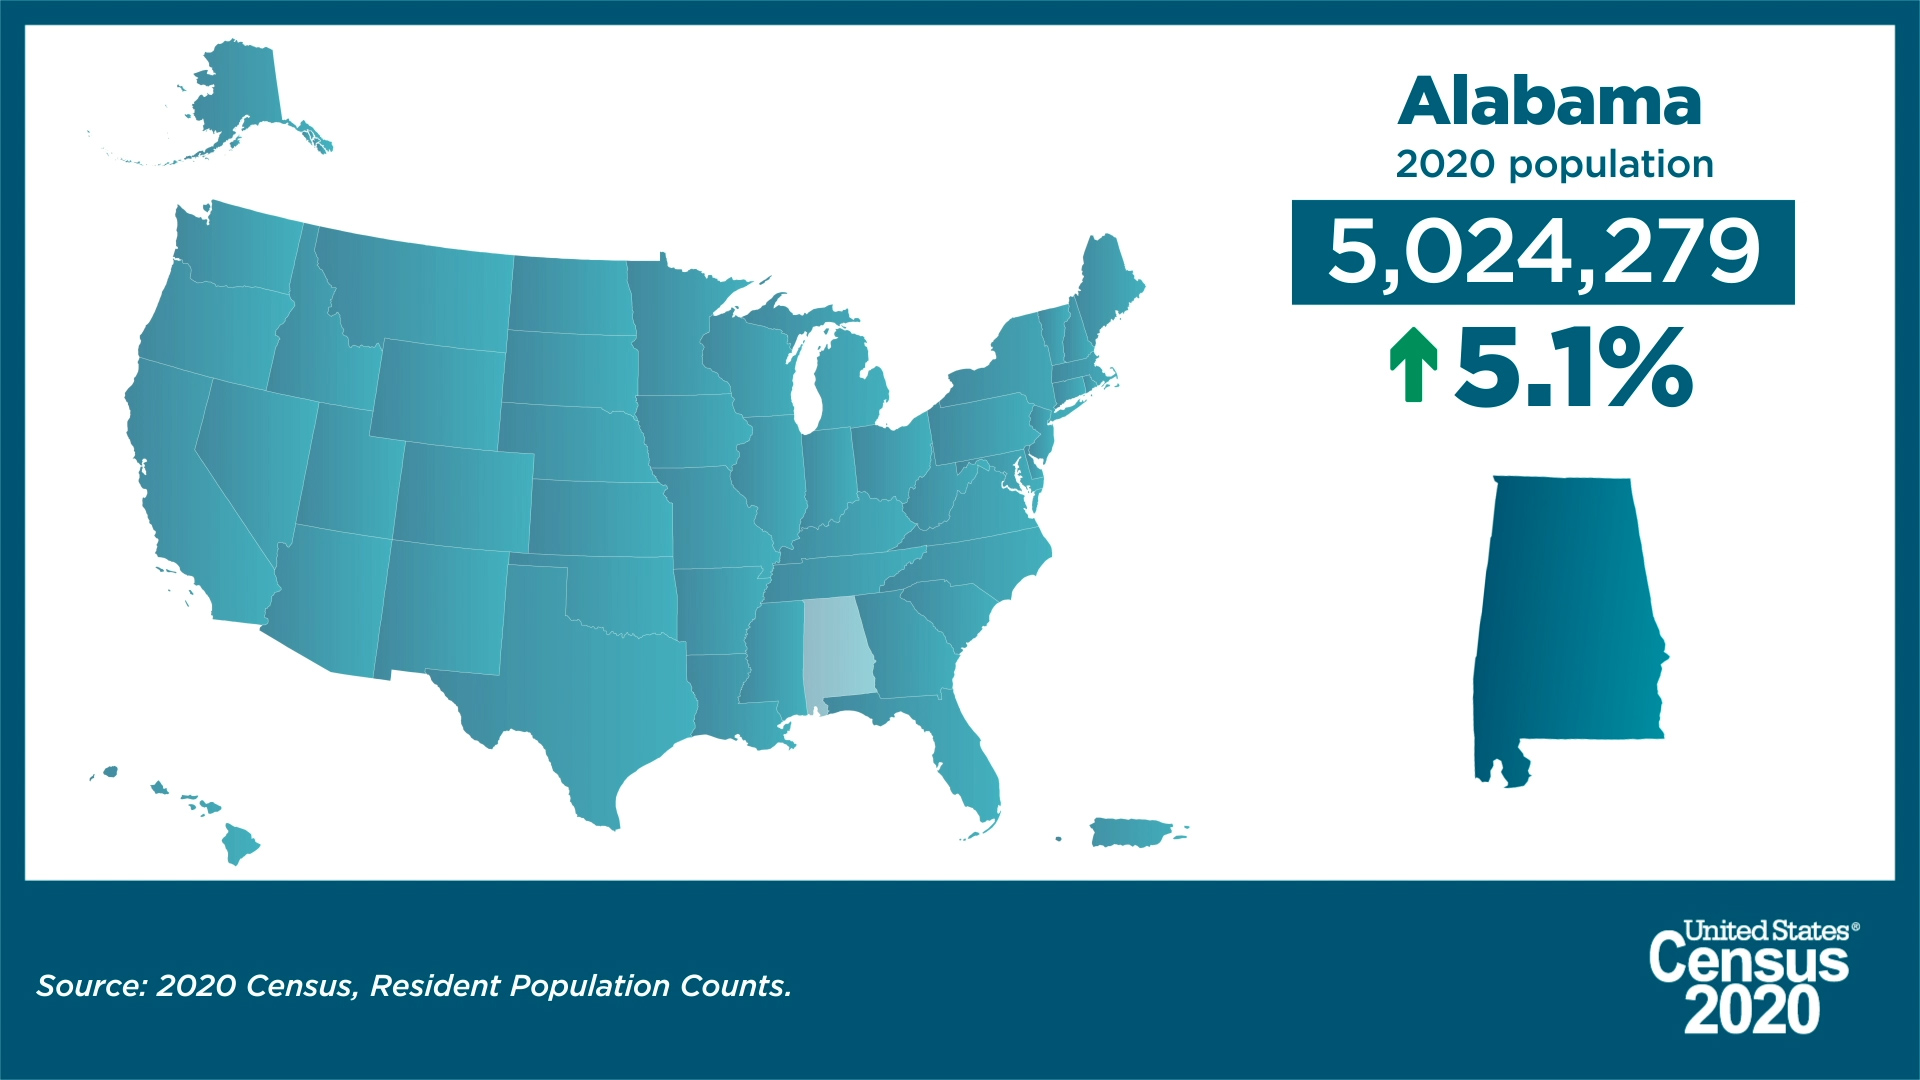 An image of the USA with Alabama shaded lighter along with data indicating how much its population has changed since 2010